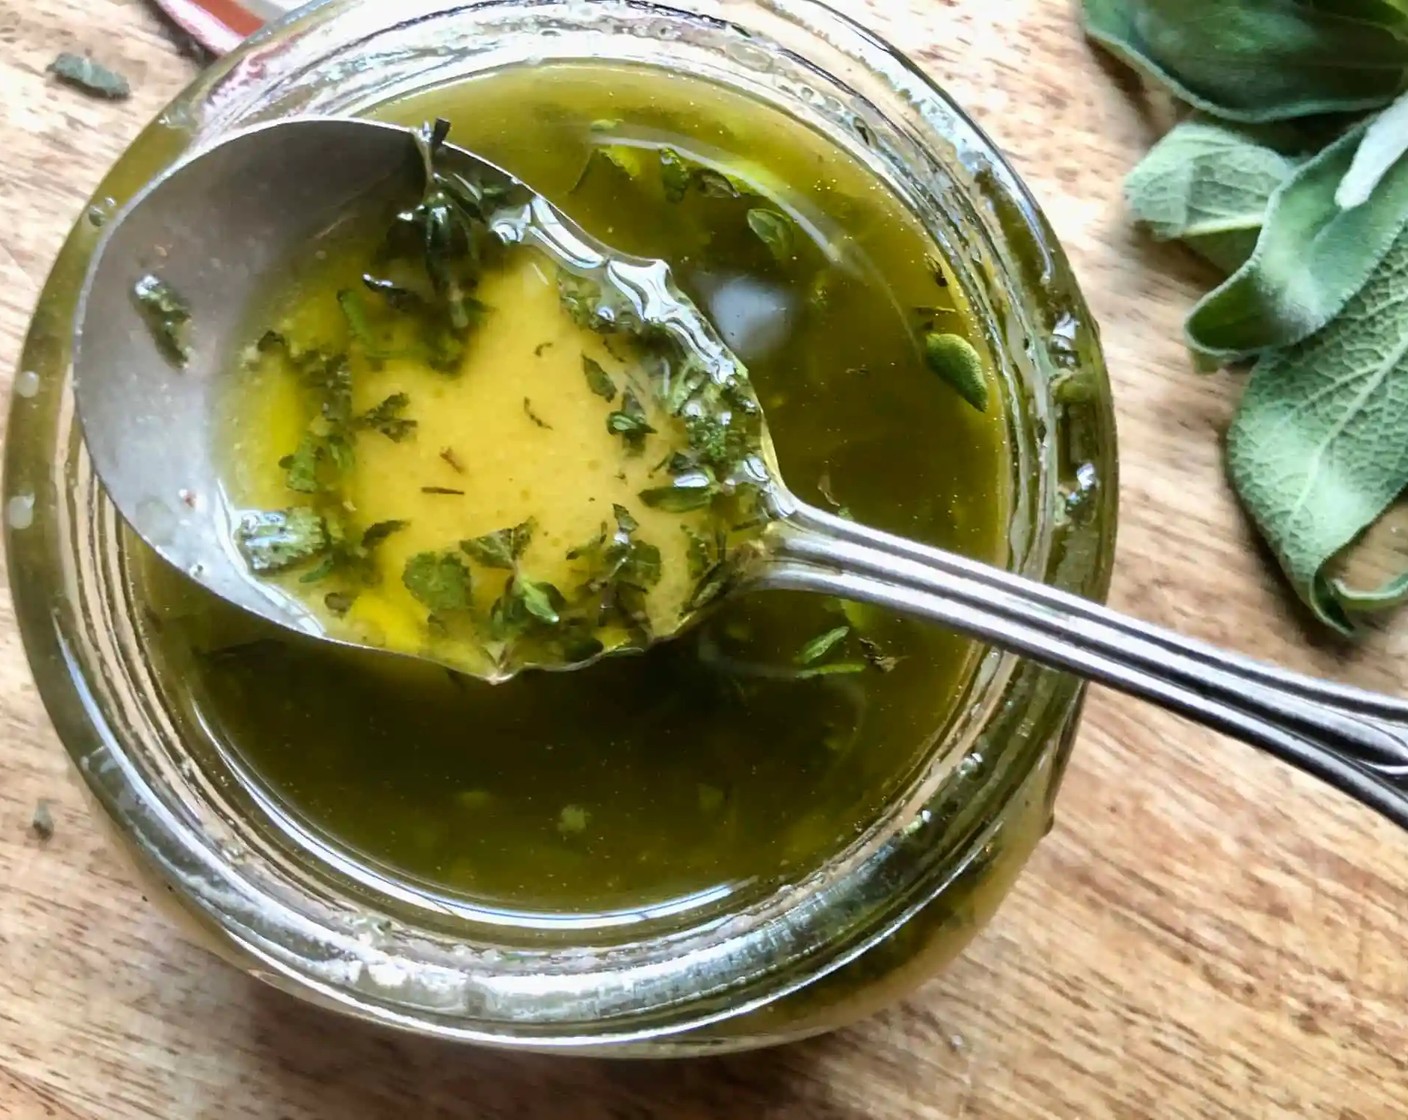 step 1 Combine the Extra-Virgin Olive Oil (1/3 cup), Apple Cider Vinegar (1/4 cup), Dijon Mustard (1 Tbsp), Apple Butter (1 Tbsp), Maple Syrup (1/2 Tbsp), Fresh Thyme Leaves (1 Tbsp), and Sage Leaves (1/2 Tbsp) in a jar with a lid and shake. Taste and season with Kosher Salt (to taste) and Freshly Ground Black Pepper (to taste). Set aside.